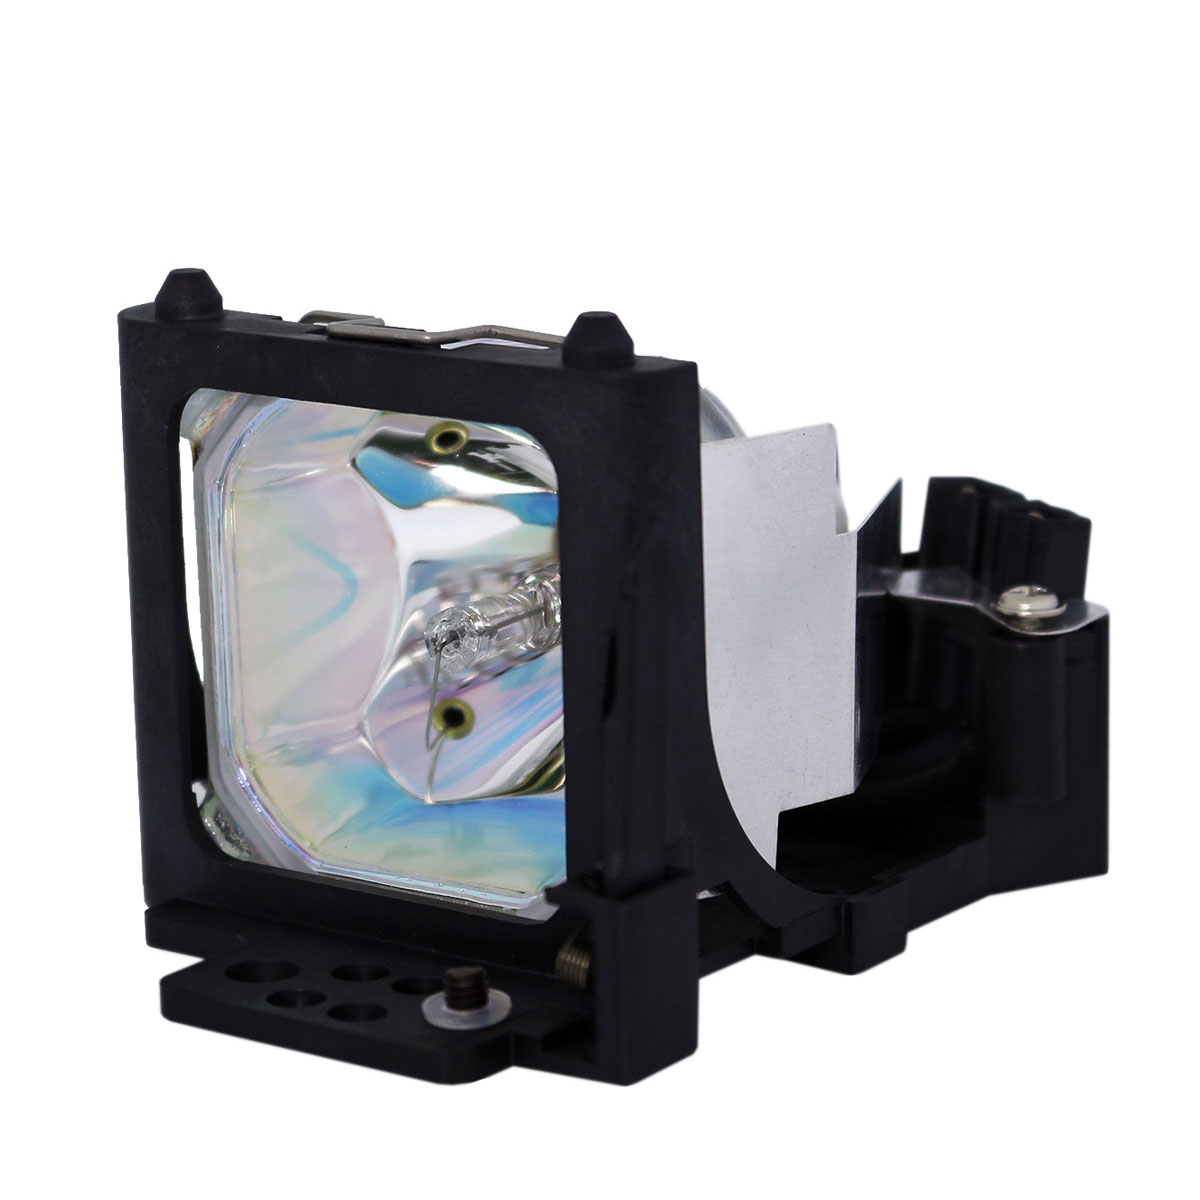 Buyquest Imagepro 8802  OEM Replacement Projector Lamp for Dukane. Includes New Philips UHB 150W Bulb and Housing